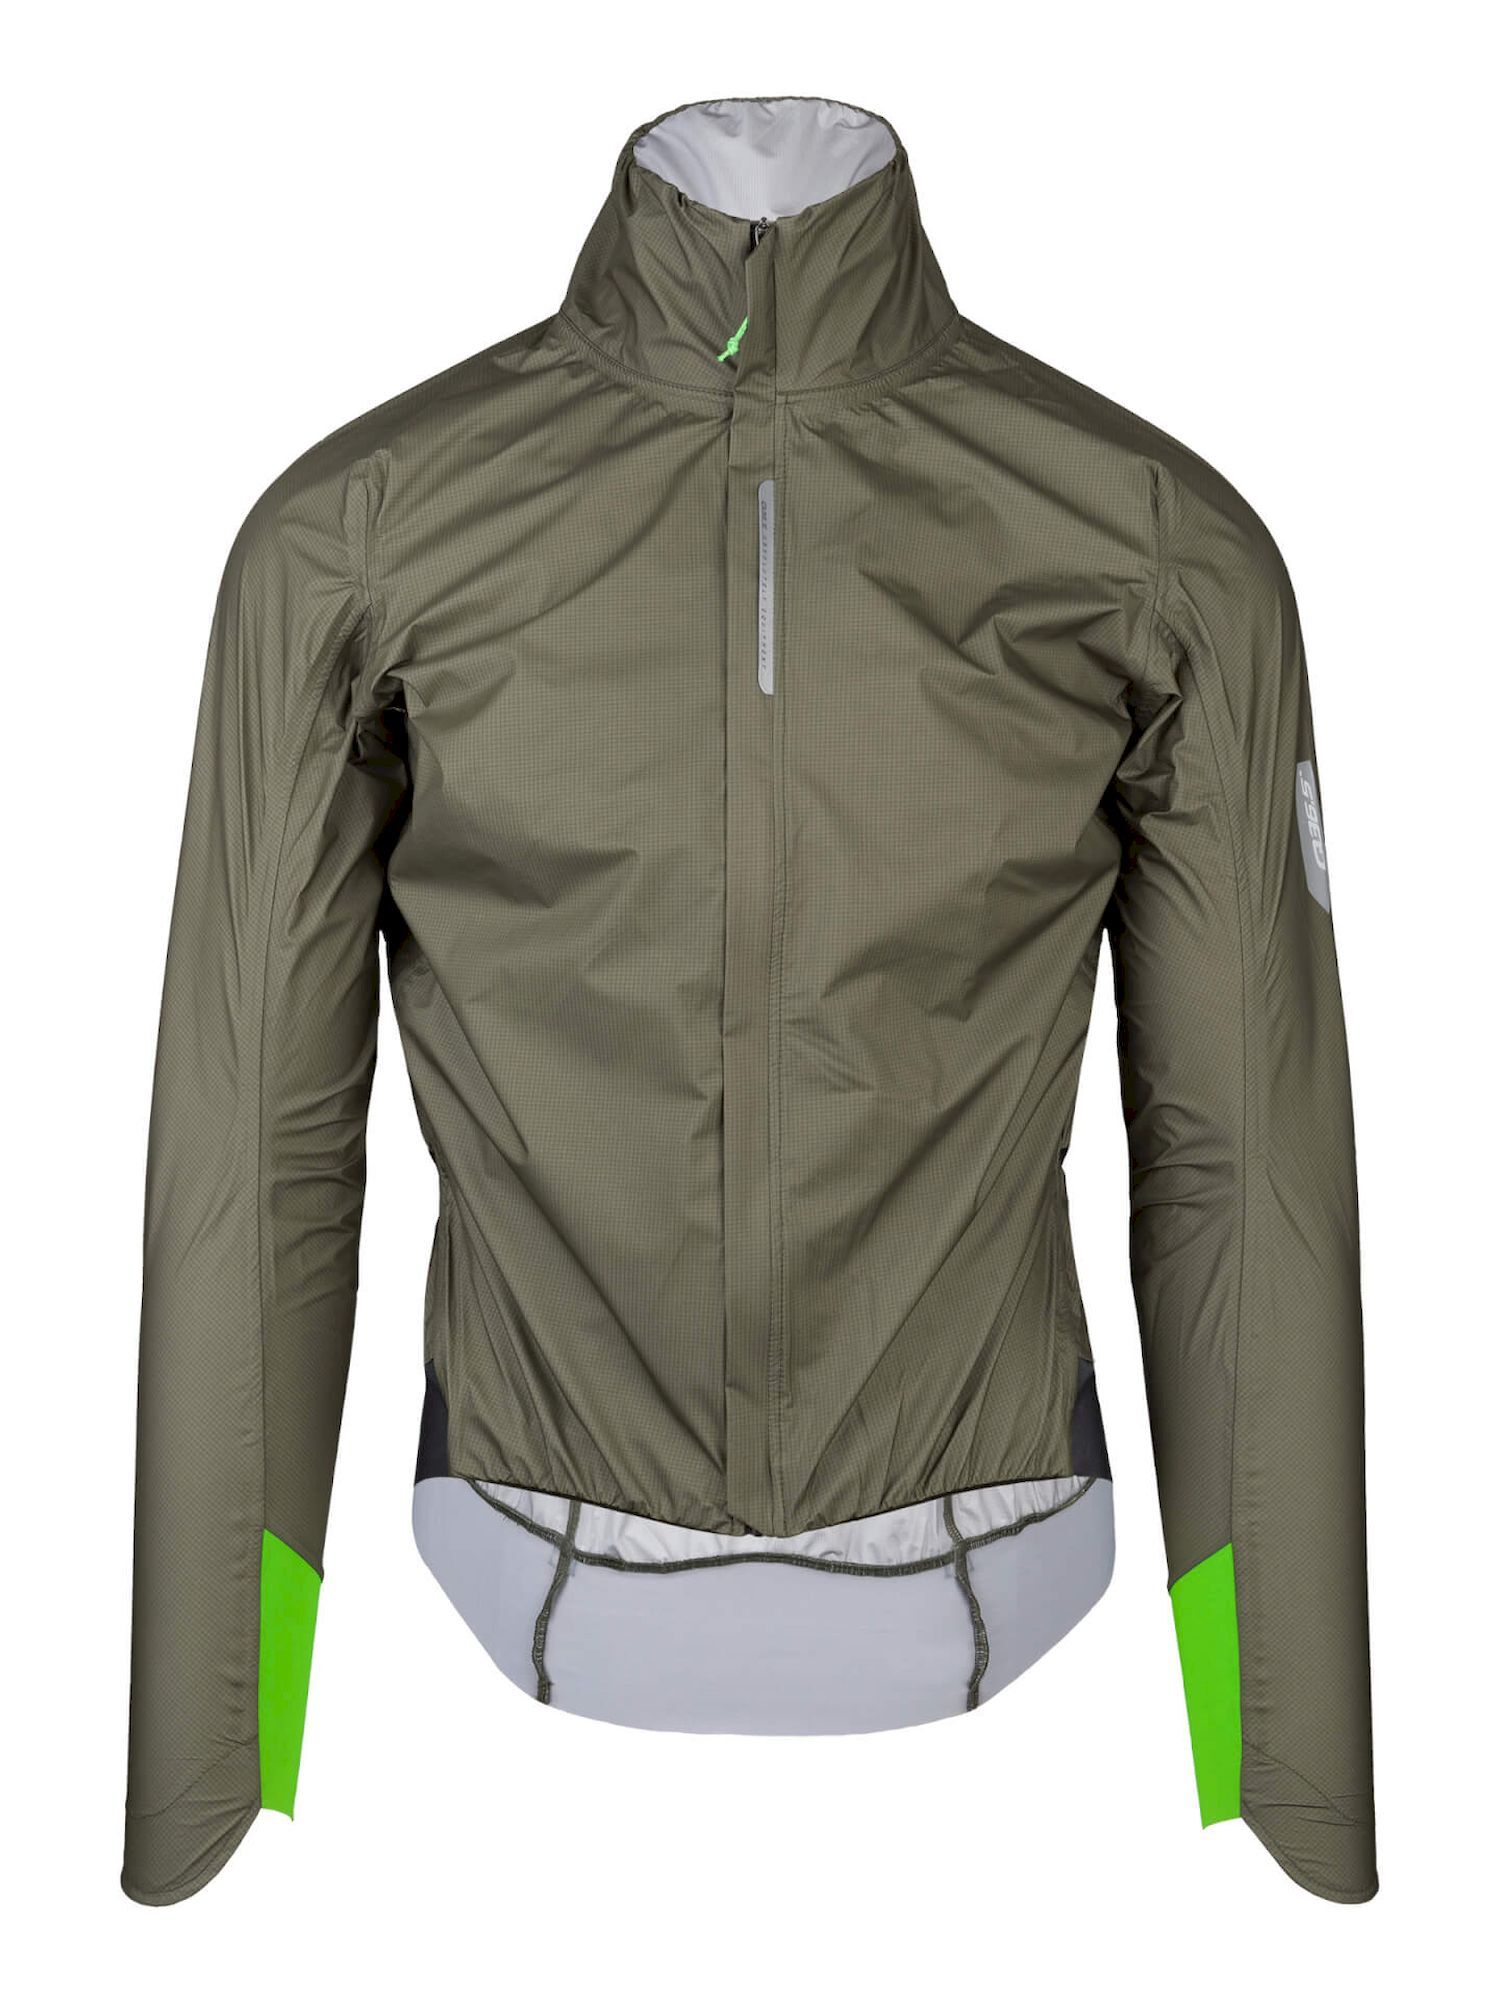 Q36.5 R. Shell Protection X - Cycling windproof jacket - Men's